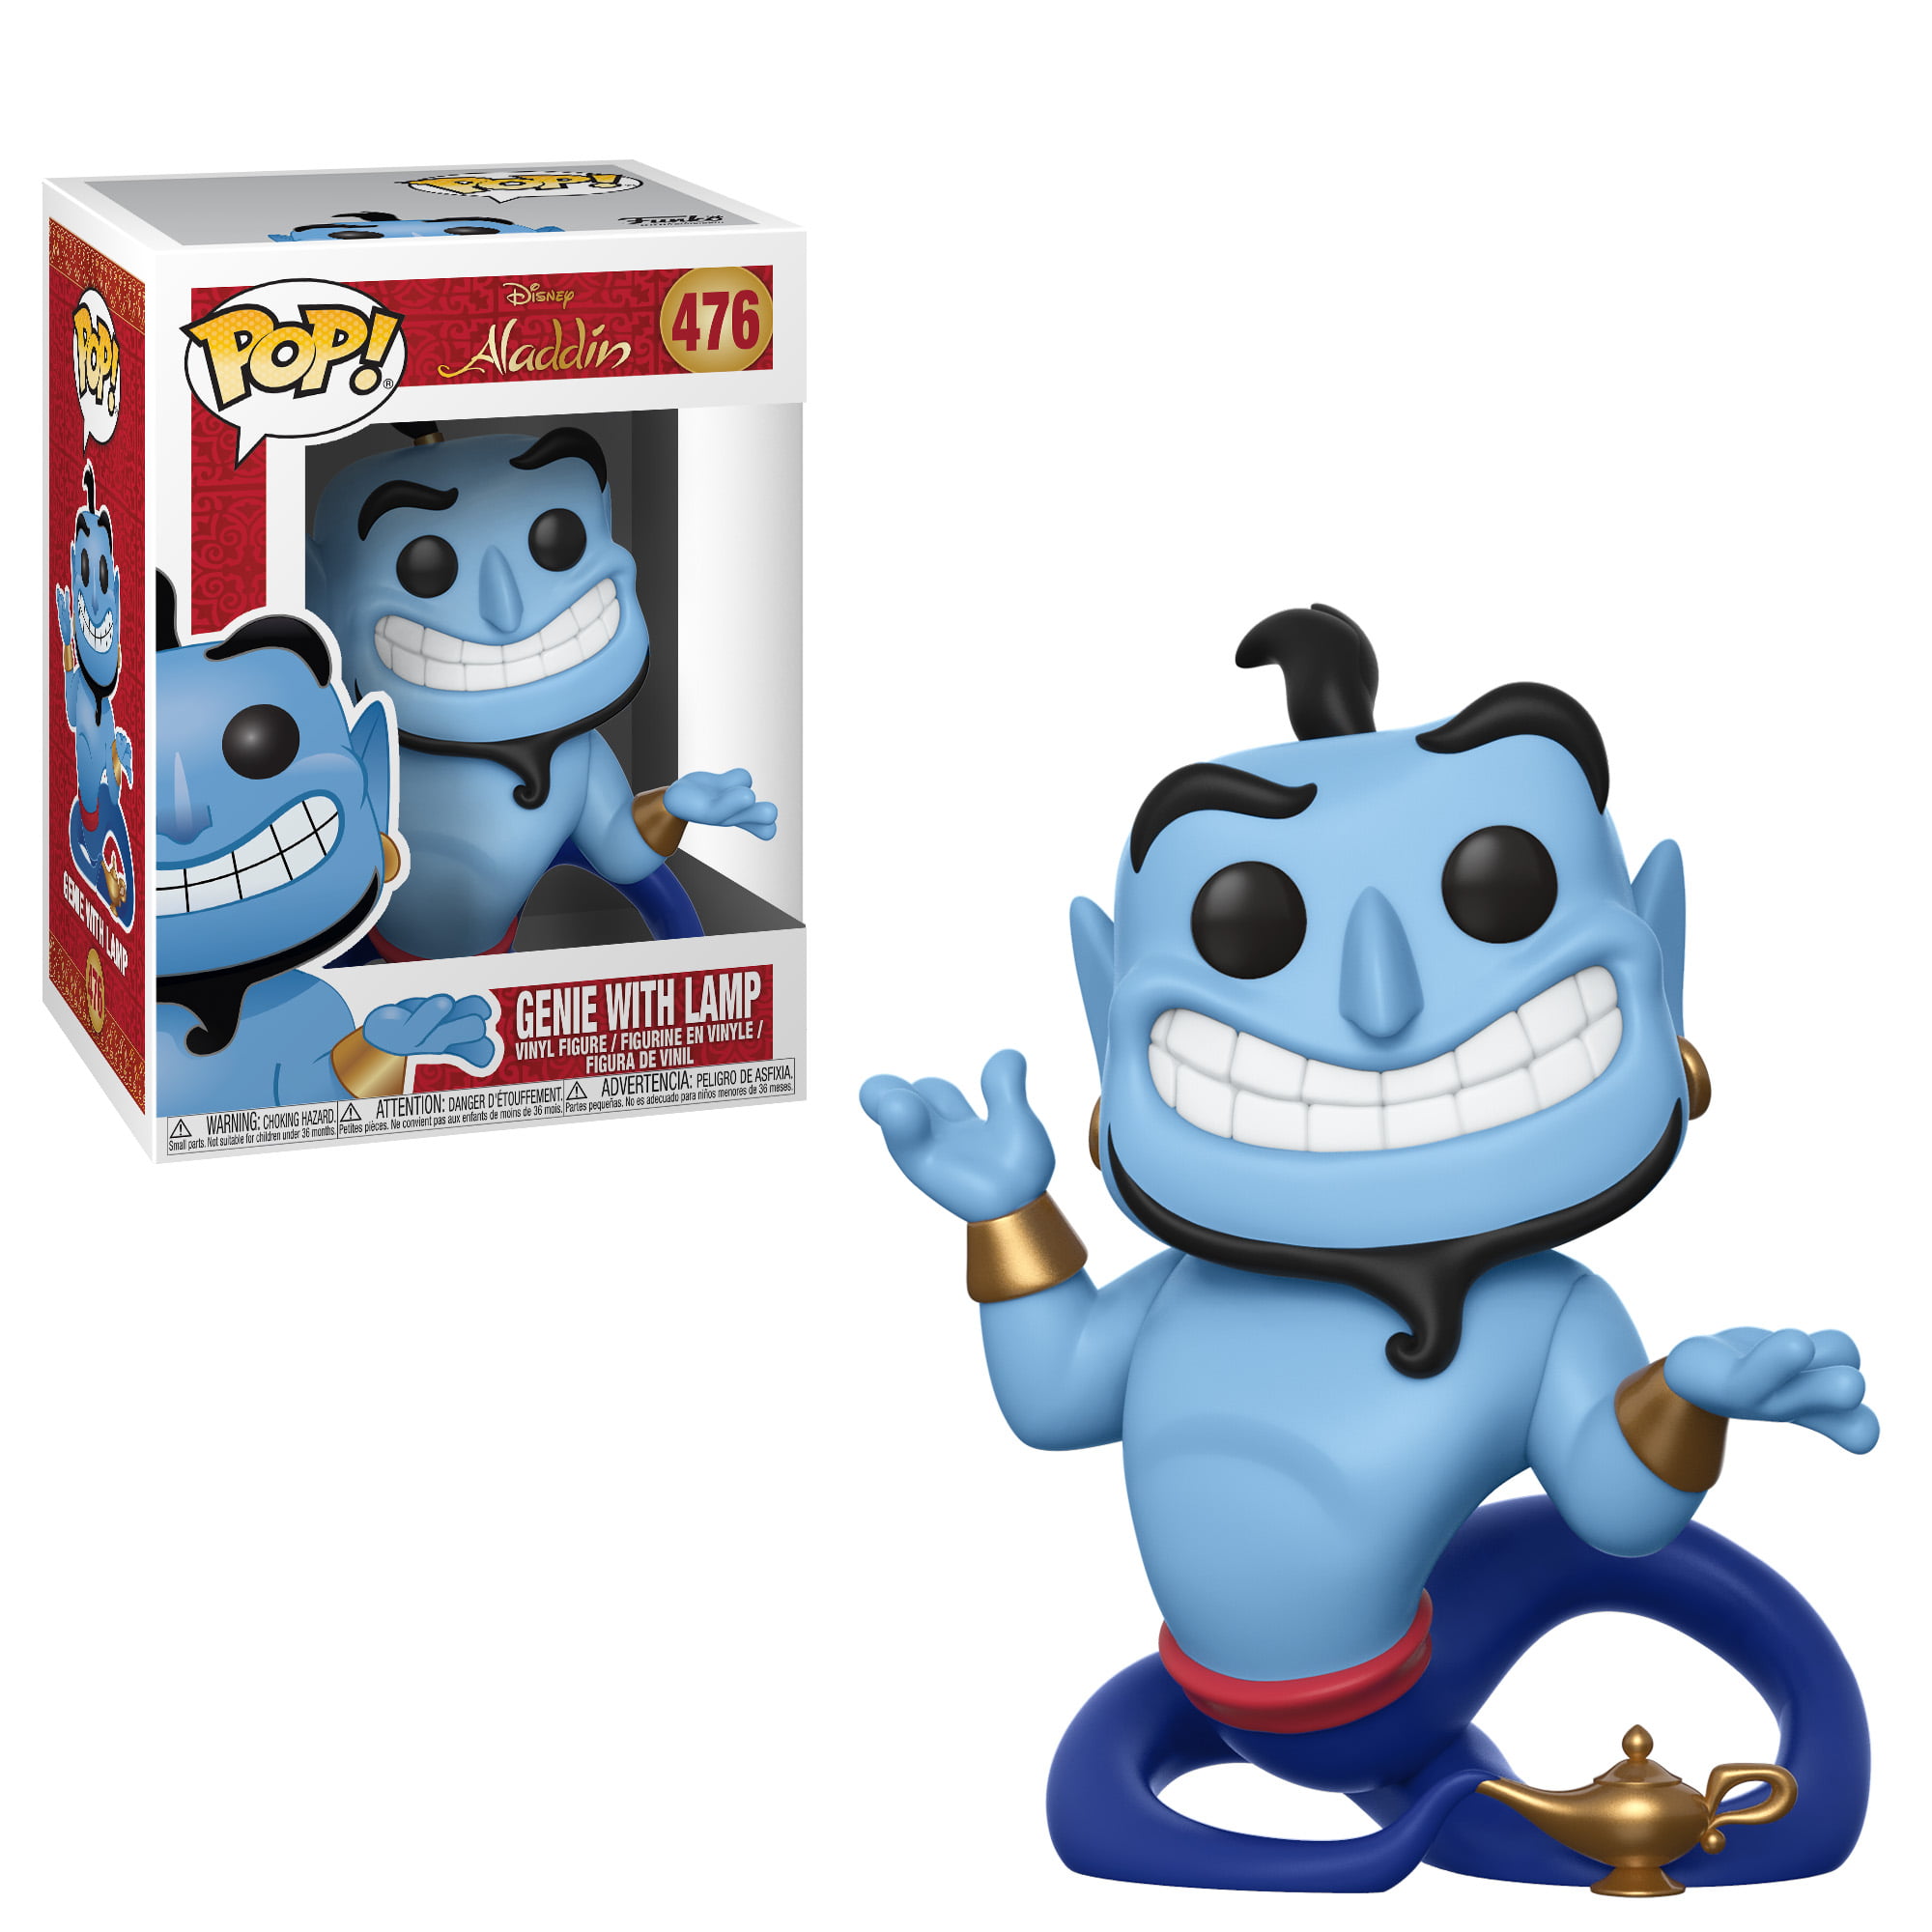 Funko POP! Disney Aladdin: Prince Ali, Jasmine in Disguise (Possible  Limited Chase Edition), Elephant Abu, Genie with Lamp (Collector's  Edition)